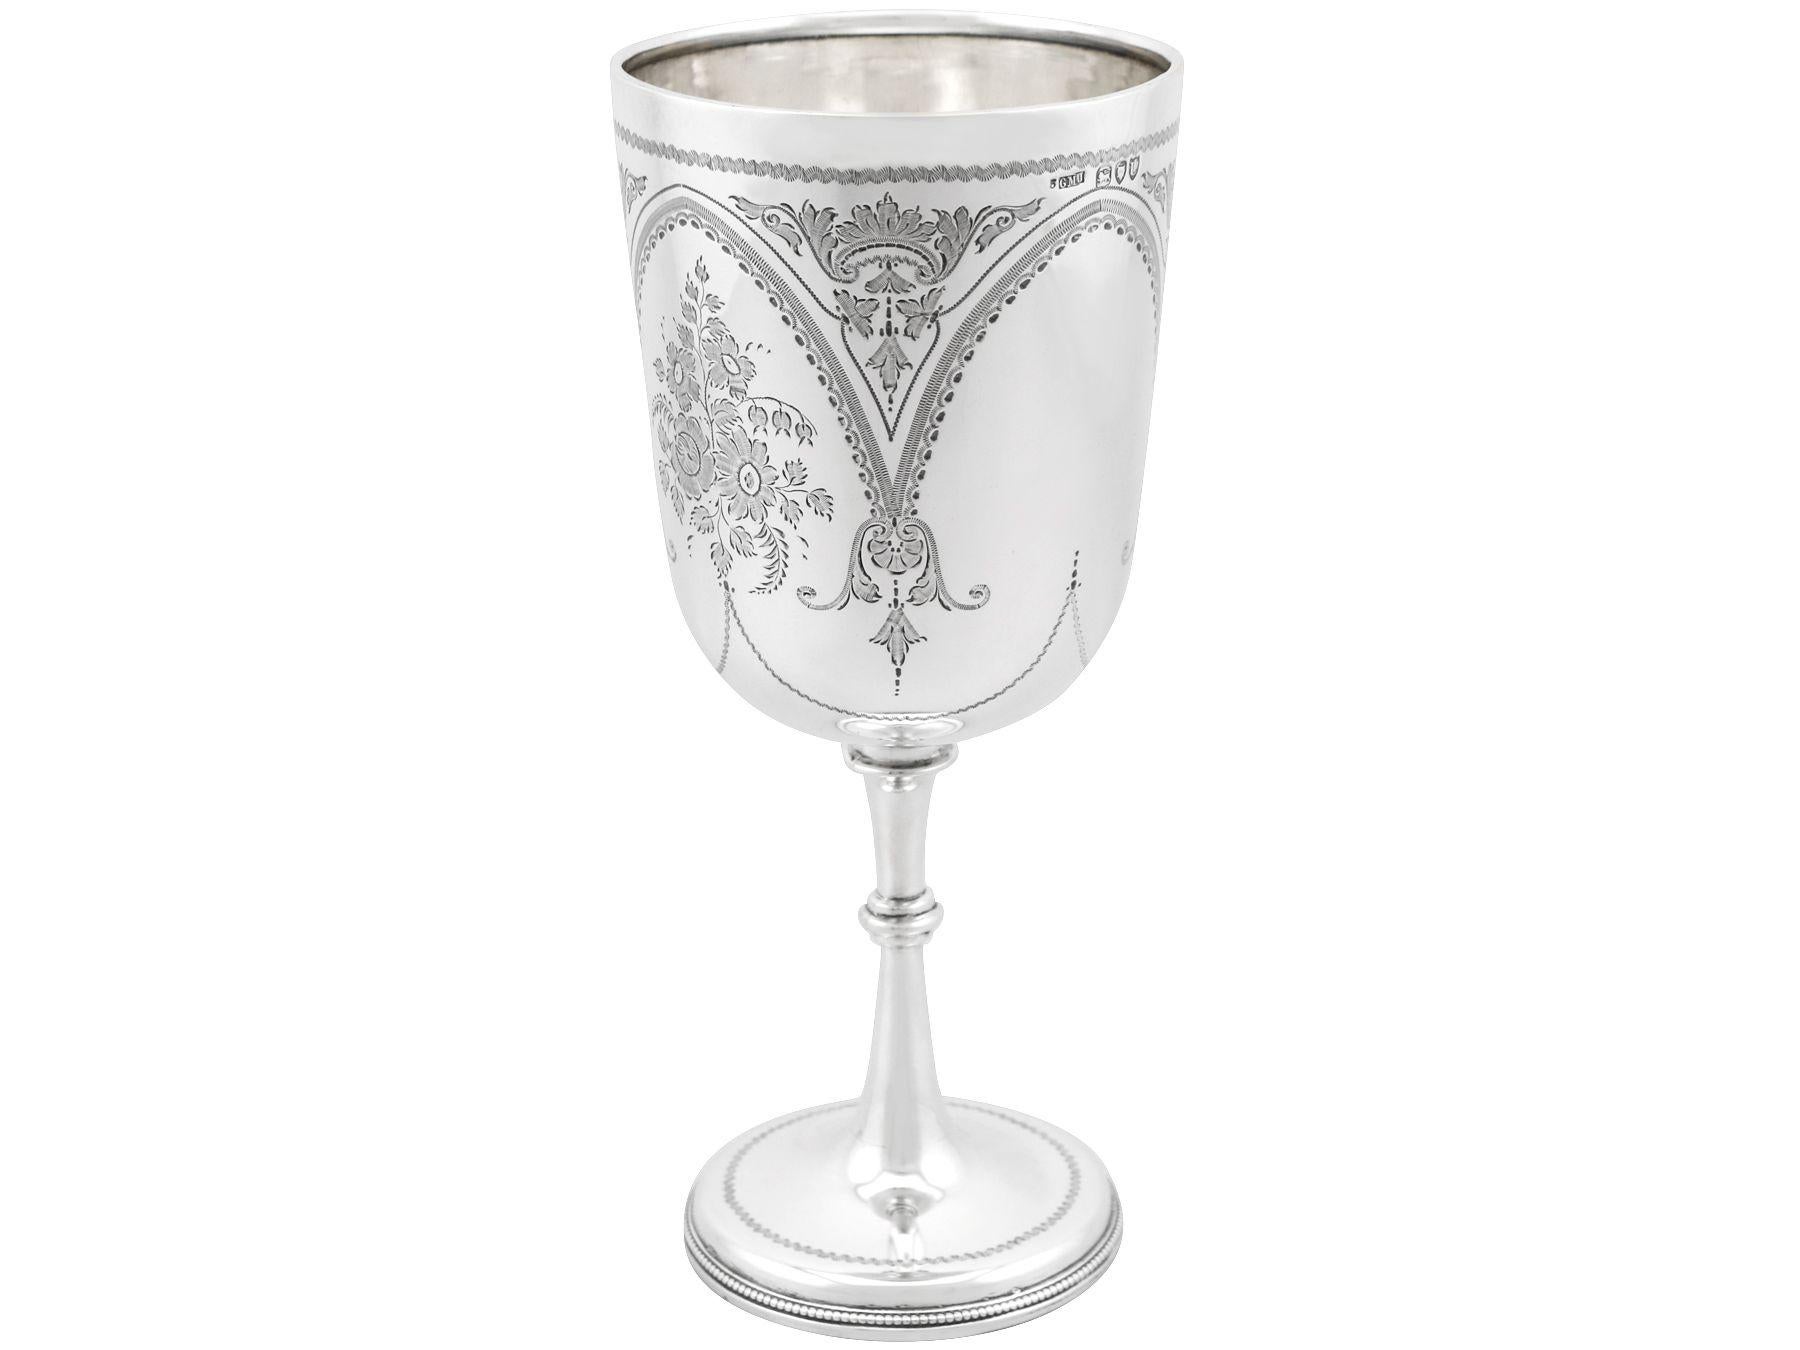 An exceptional, fine and impressive antique Victorian English sterling silver goblet; an addition to our collection of wine and drinks related silverware.

This exceptional antique sterling silver goblet has a circular bell shaped form onto a